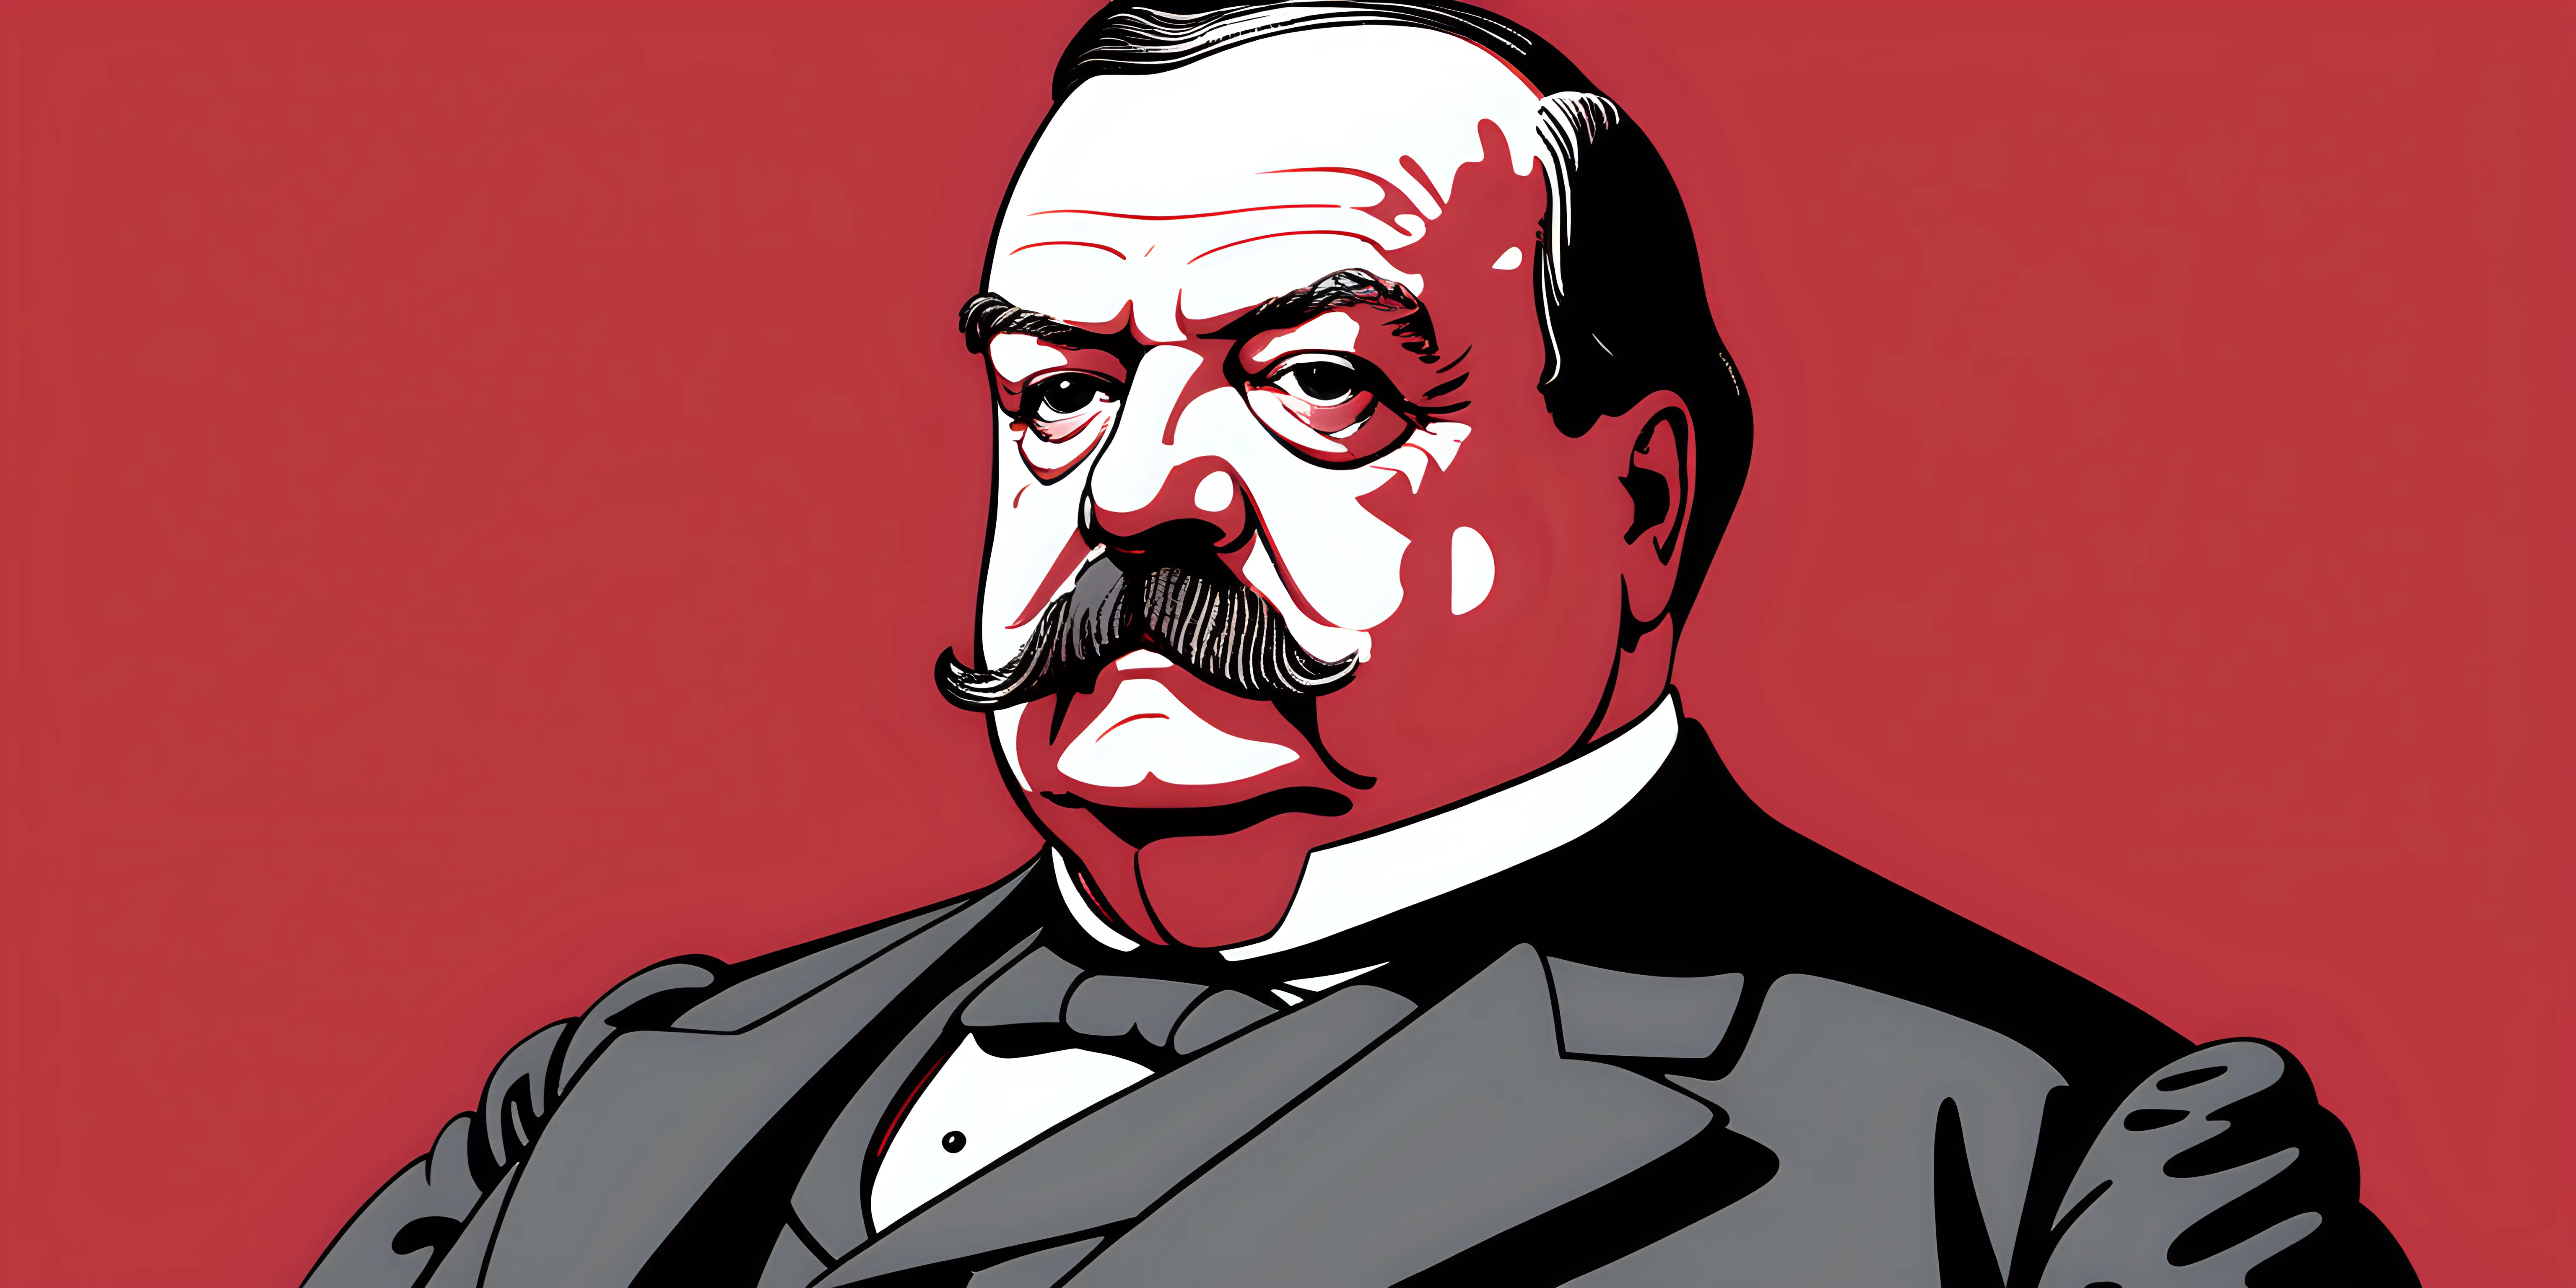 Cartoon Portrait of Grover Cleveland on a Vibrant Red Background